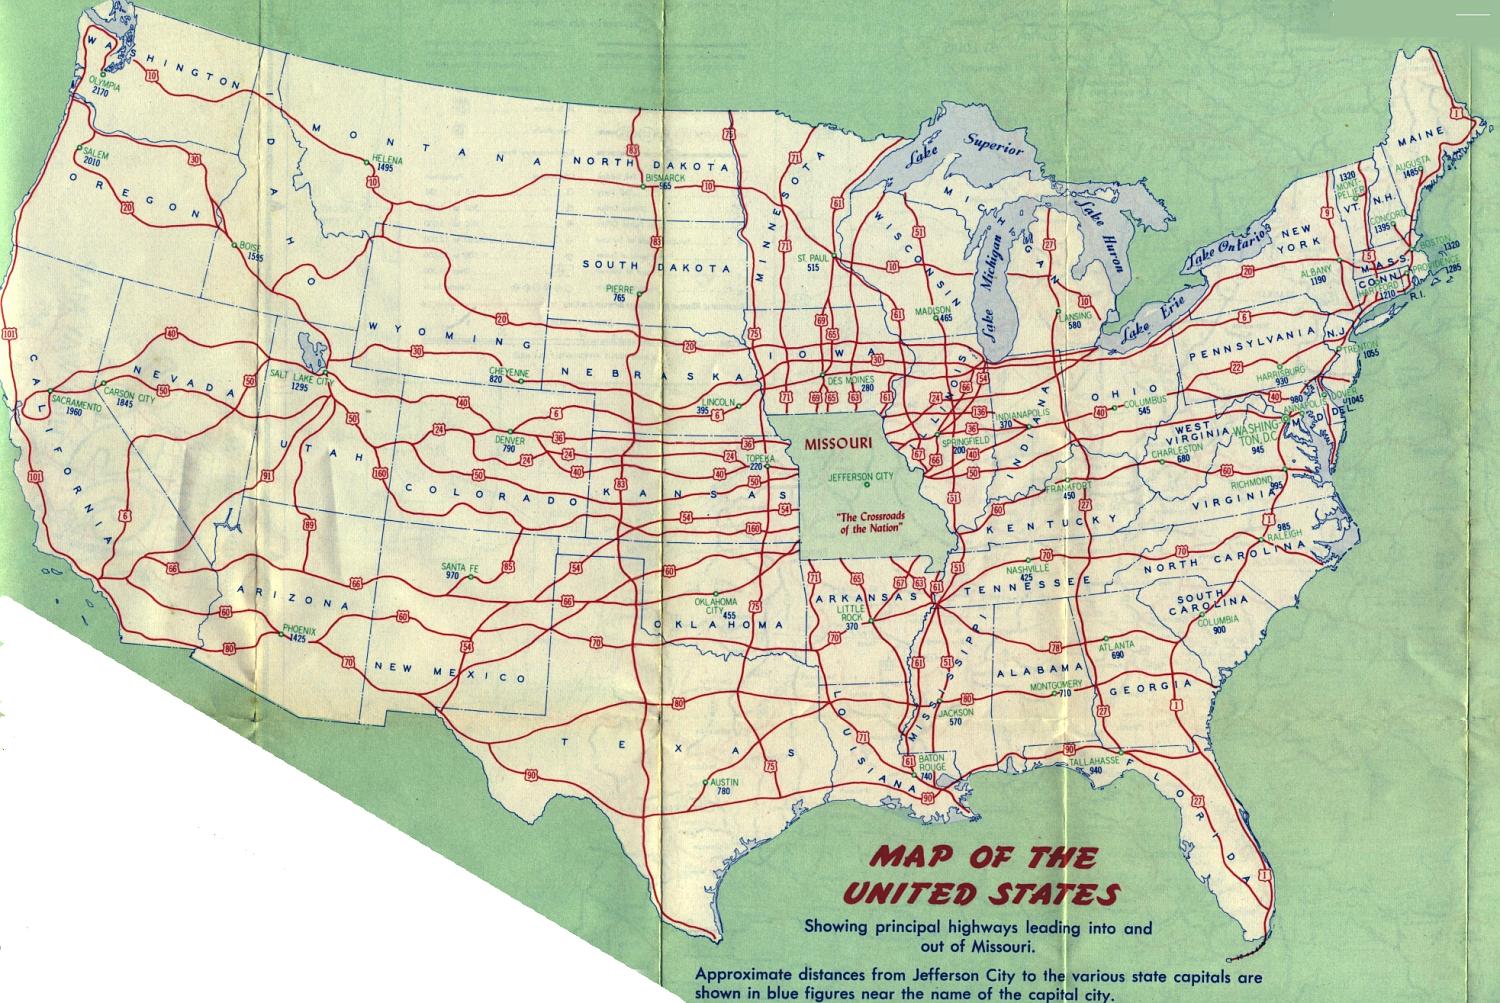 U.S. highways map on the reverse side of the 1958 official Missouri highway map